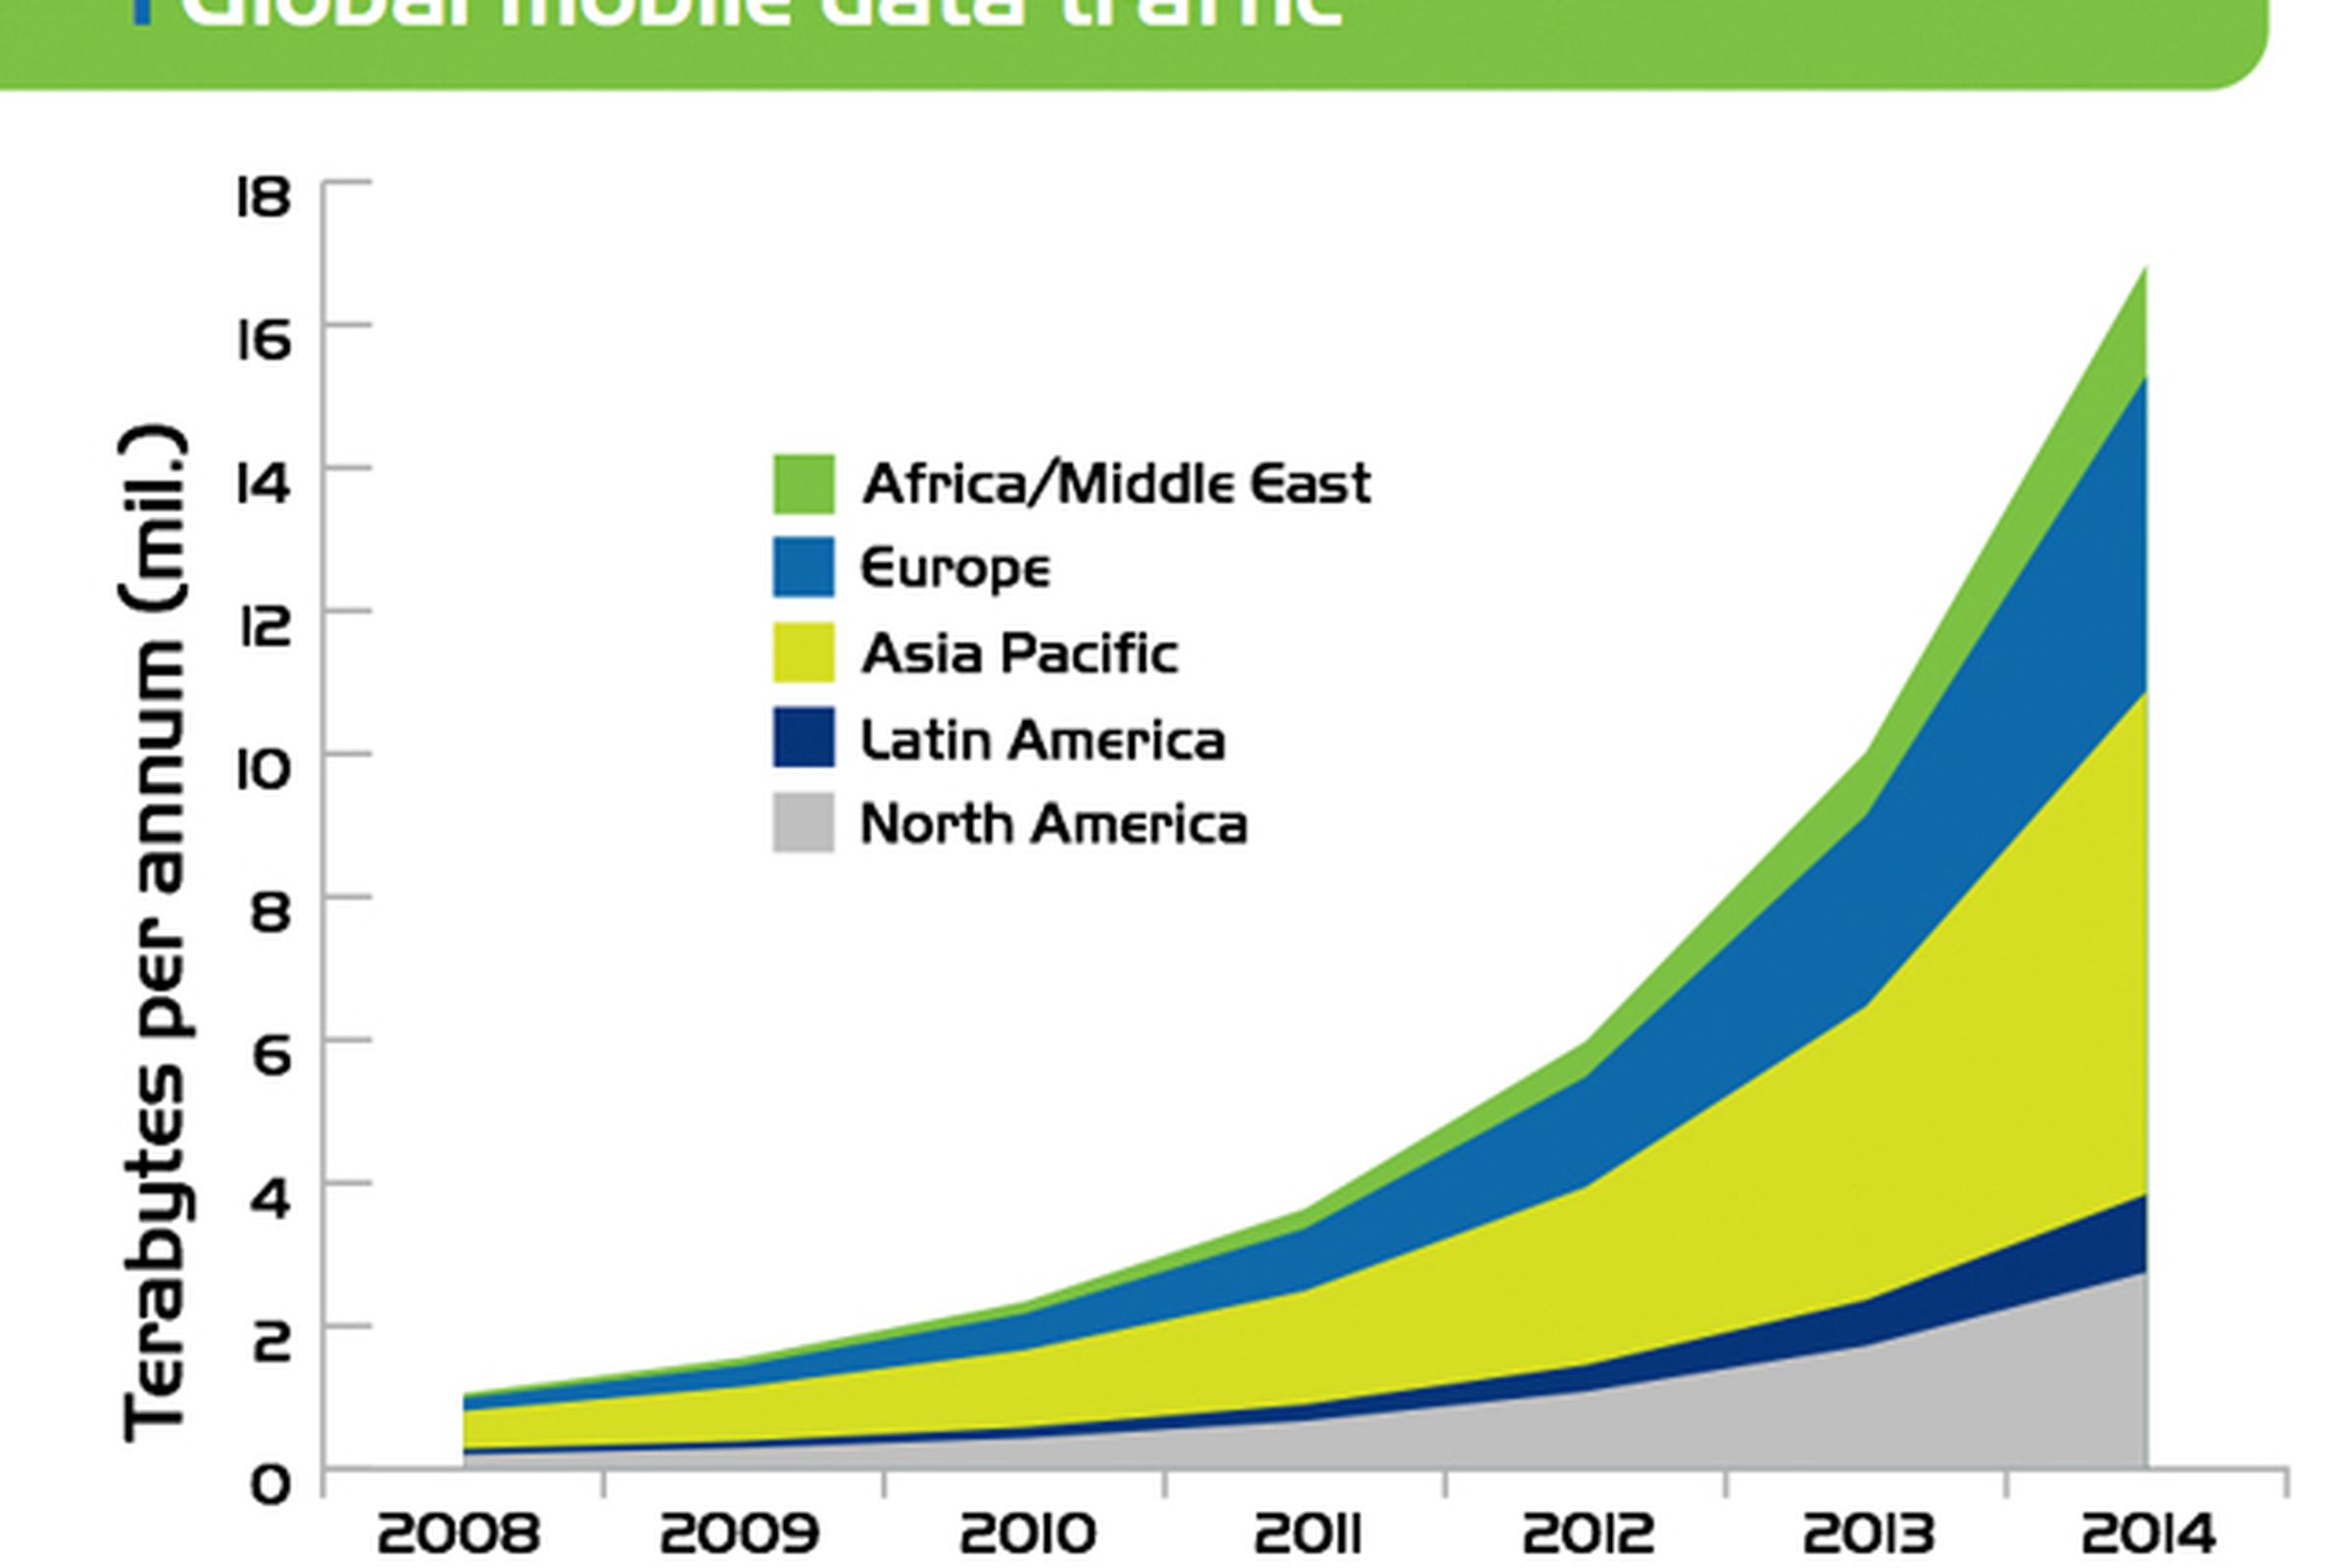 Projected Mobile Data Traffic